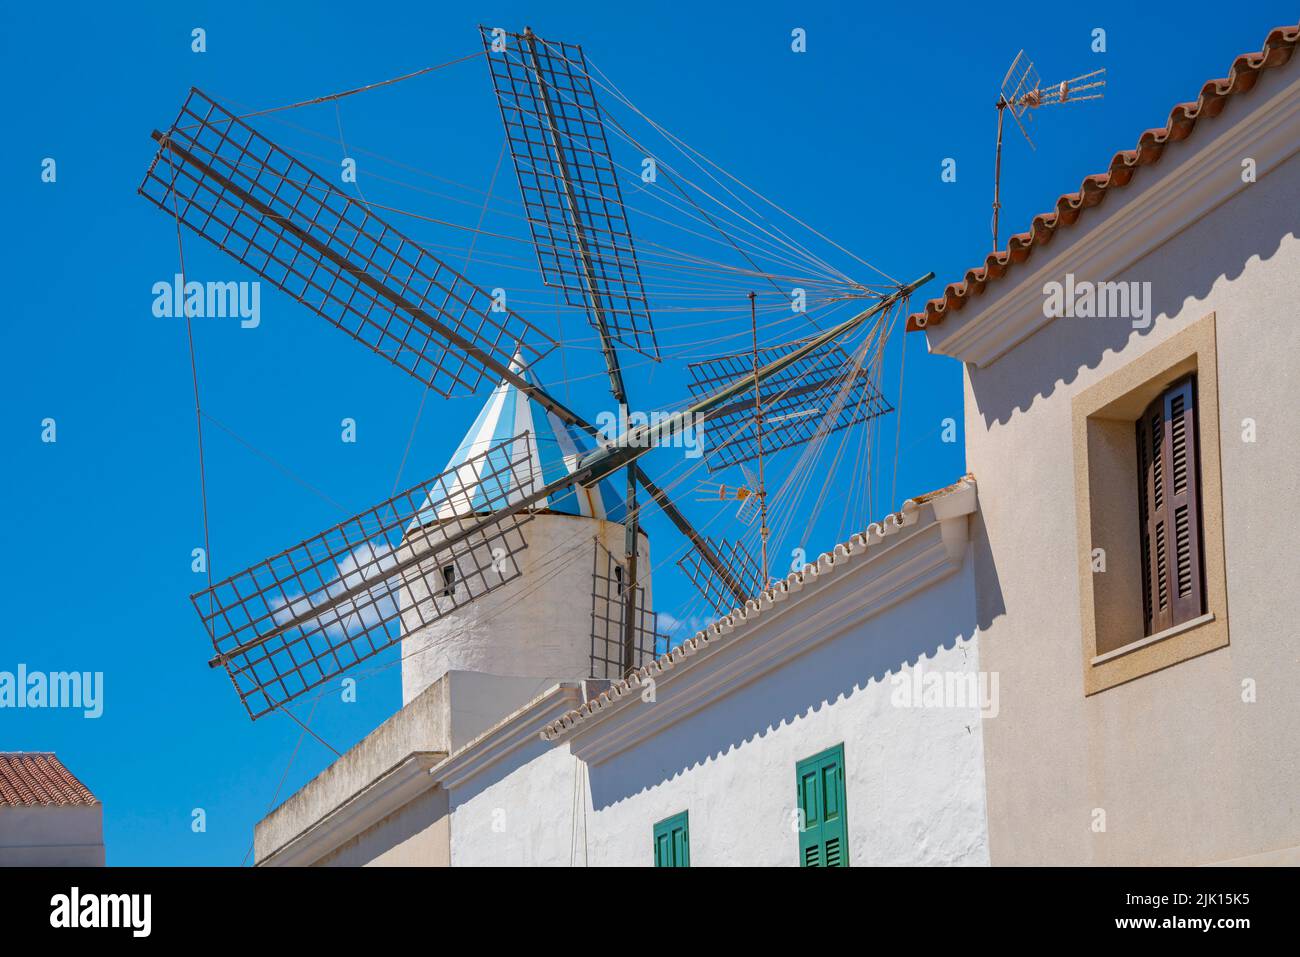 View of whitewashed houses and windmill, Sant Lluis, Menorca, Balearic Islands, Spain, Mediterranean, Europe Stock Photo